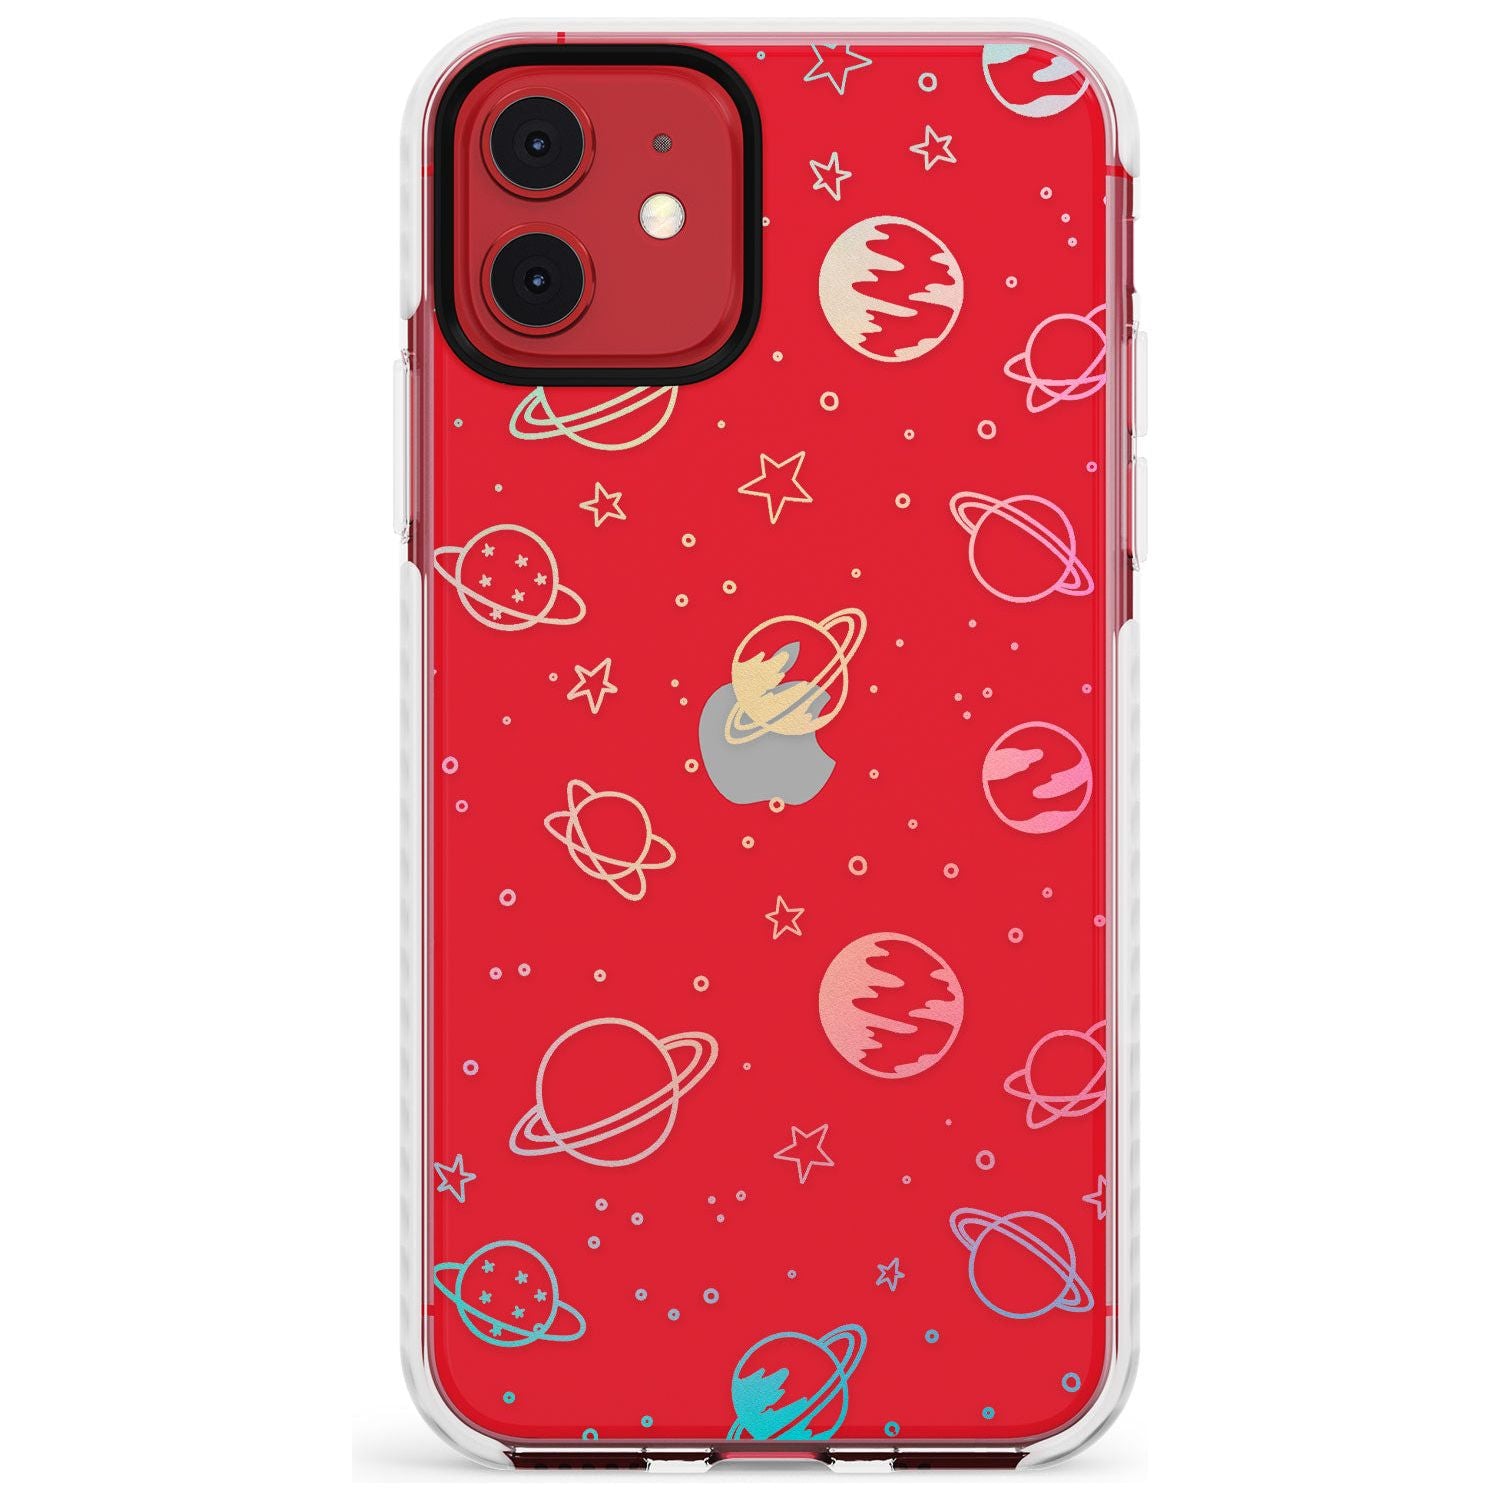 Outer Space Outlines: Pastels on Clear Slim TPU Phone Case for iPhone 11